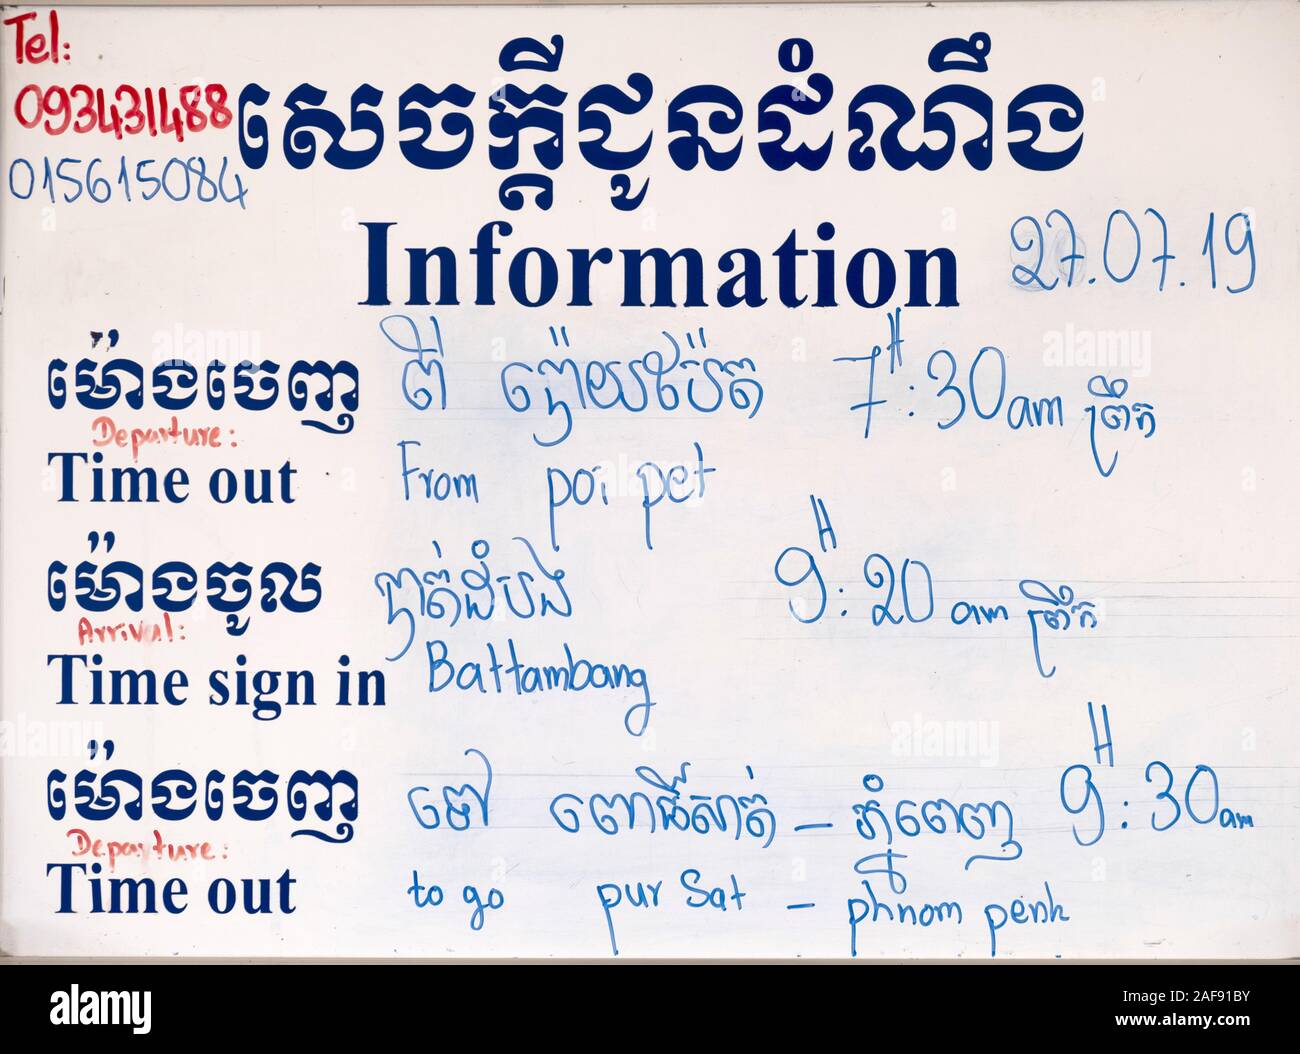 Train schedule board for the Poipet to Phnom Penh service, in Battambang railway station, Cambodia Stock Photo